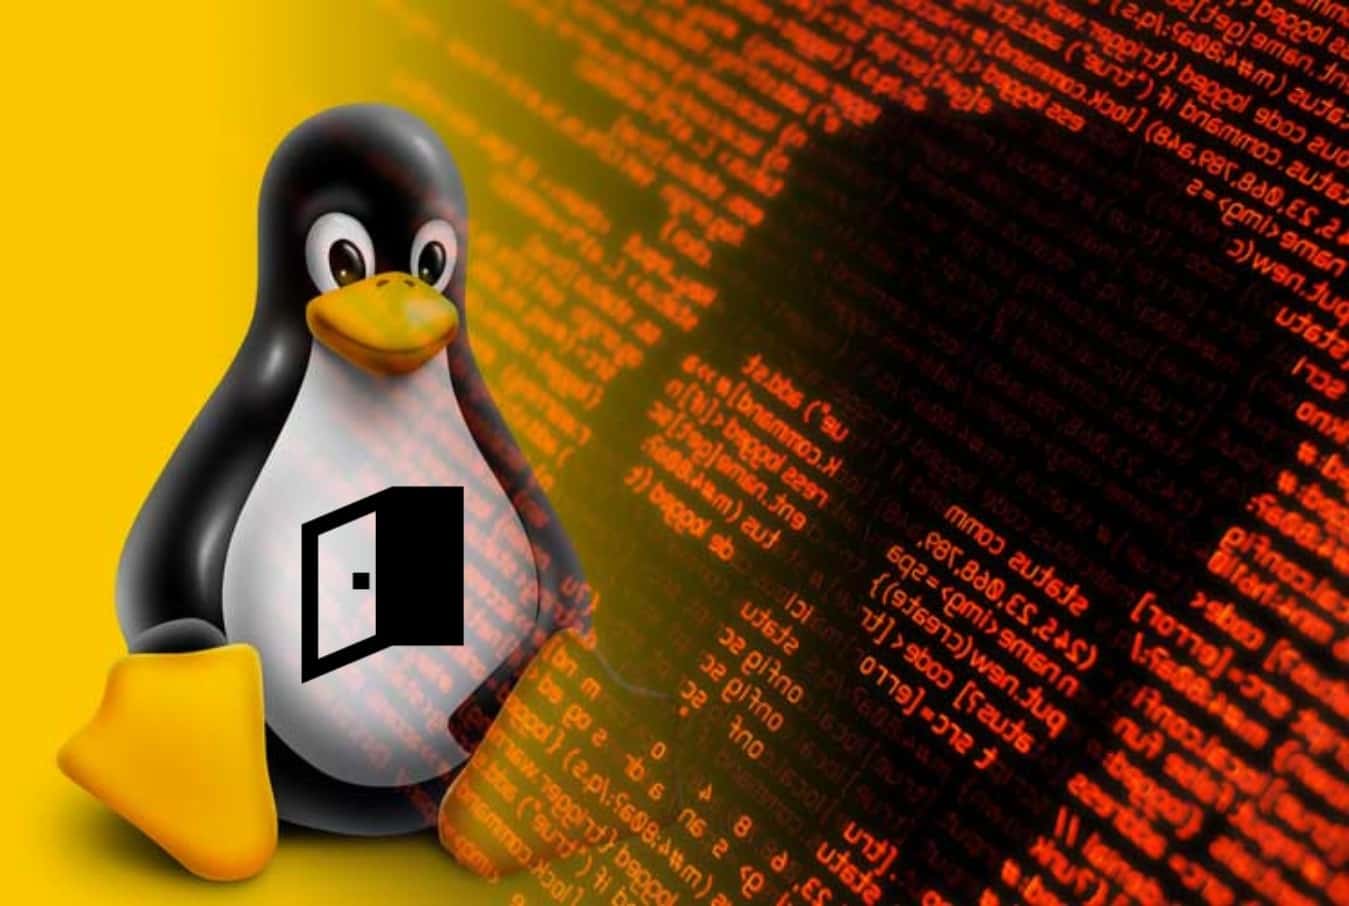 EvilGnomes Linux malware steals audios & spy on Linux users